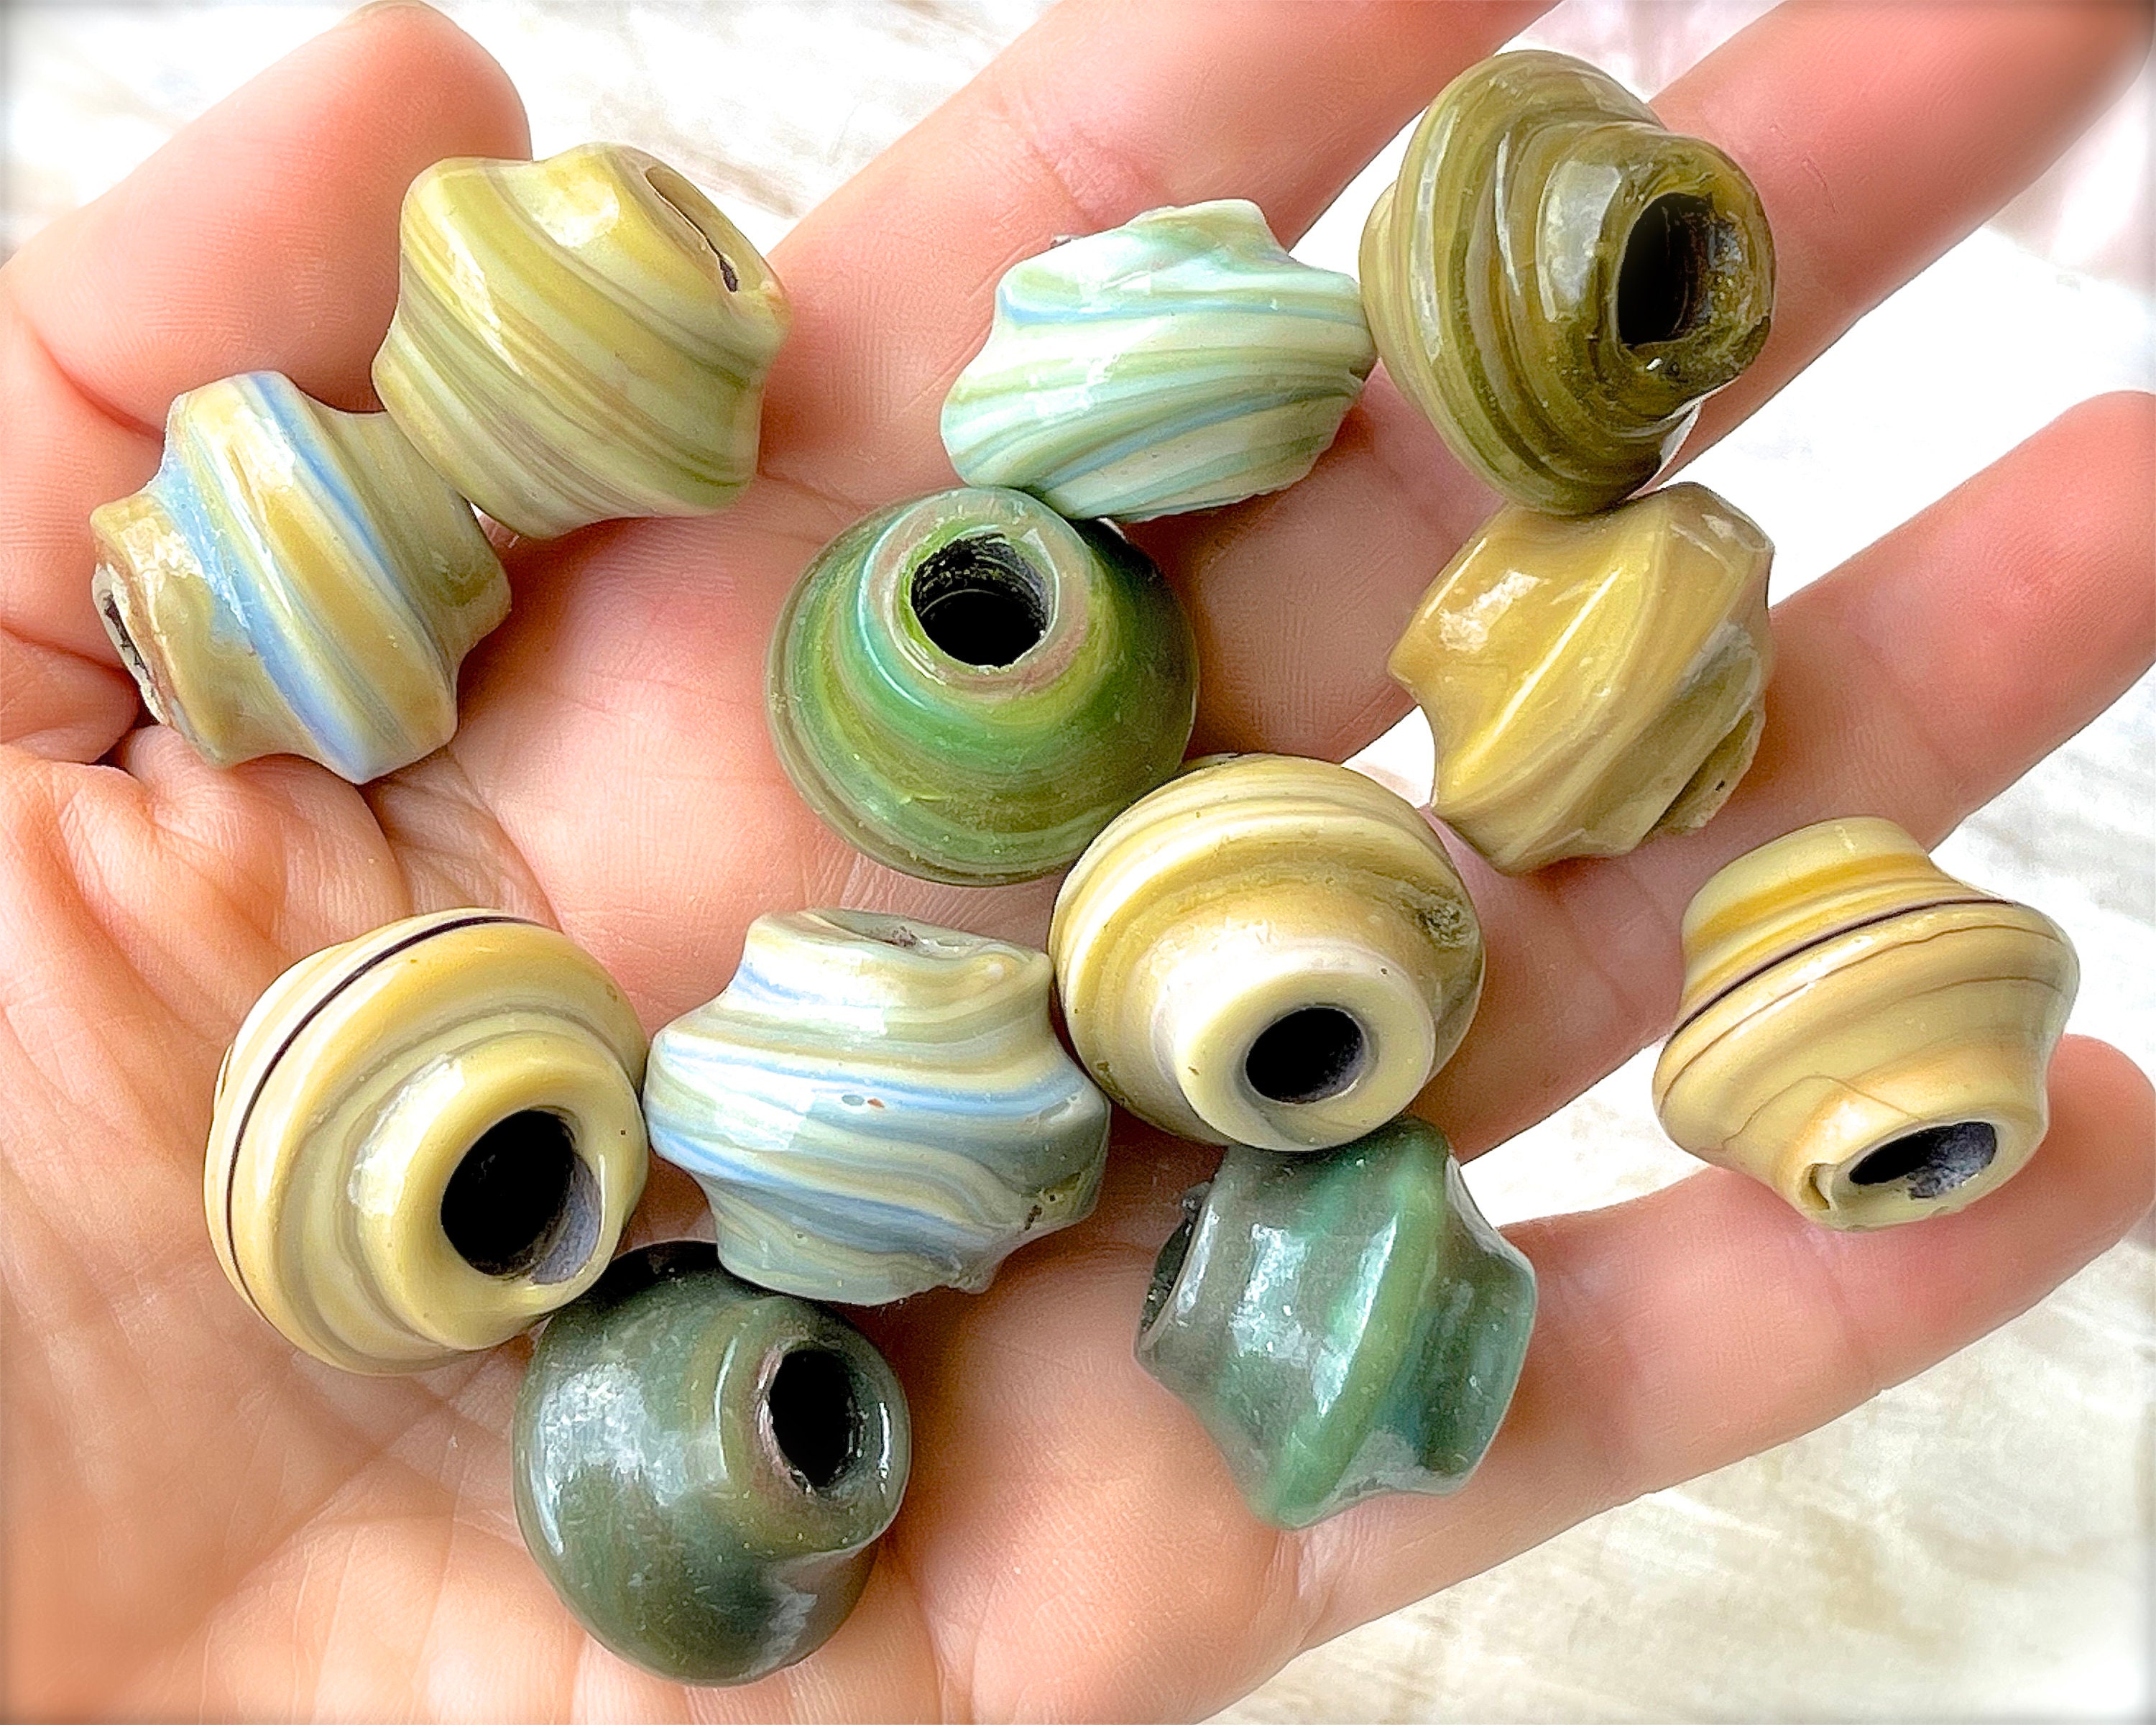 SUPPLY: 18pcs Rustic Glass Beads Distressed Beads Large -  in 2023